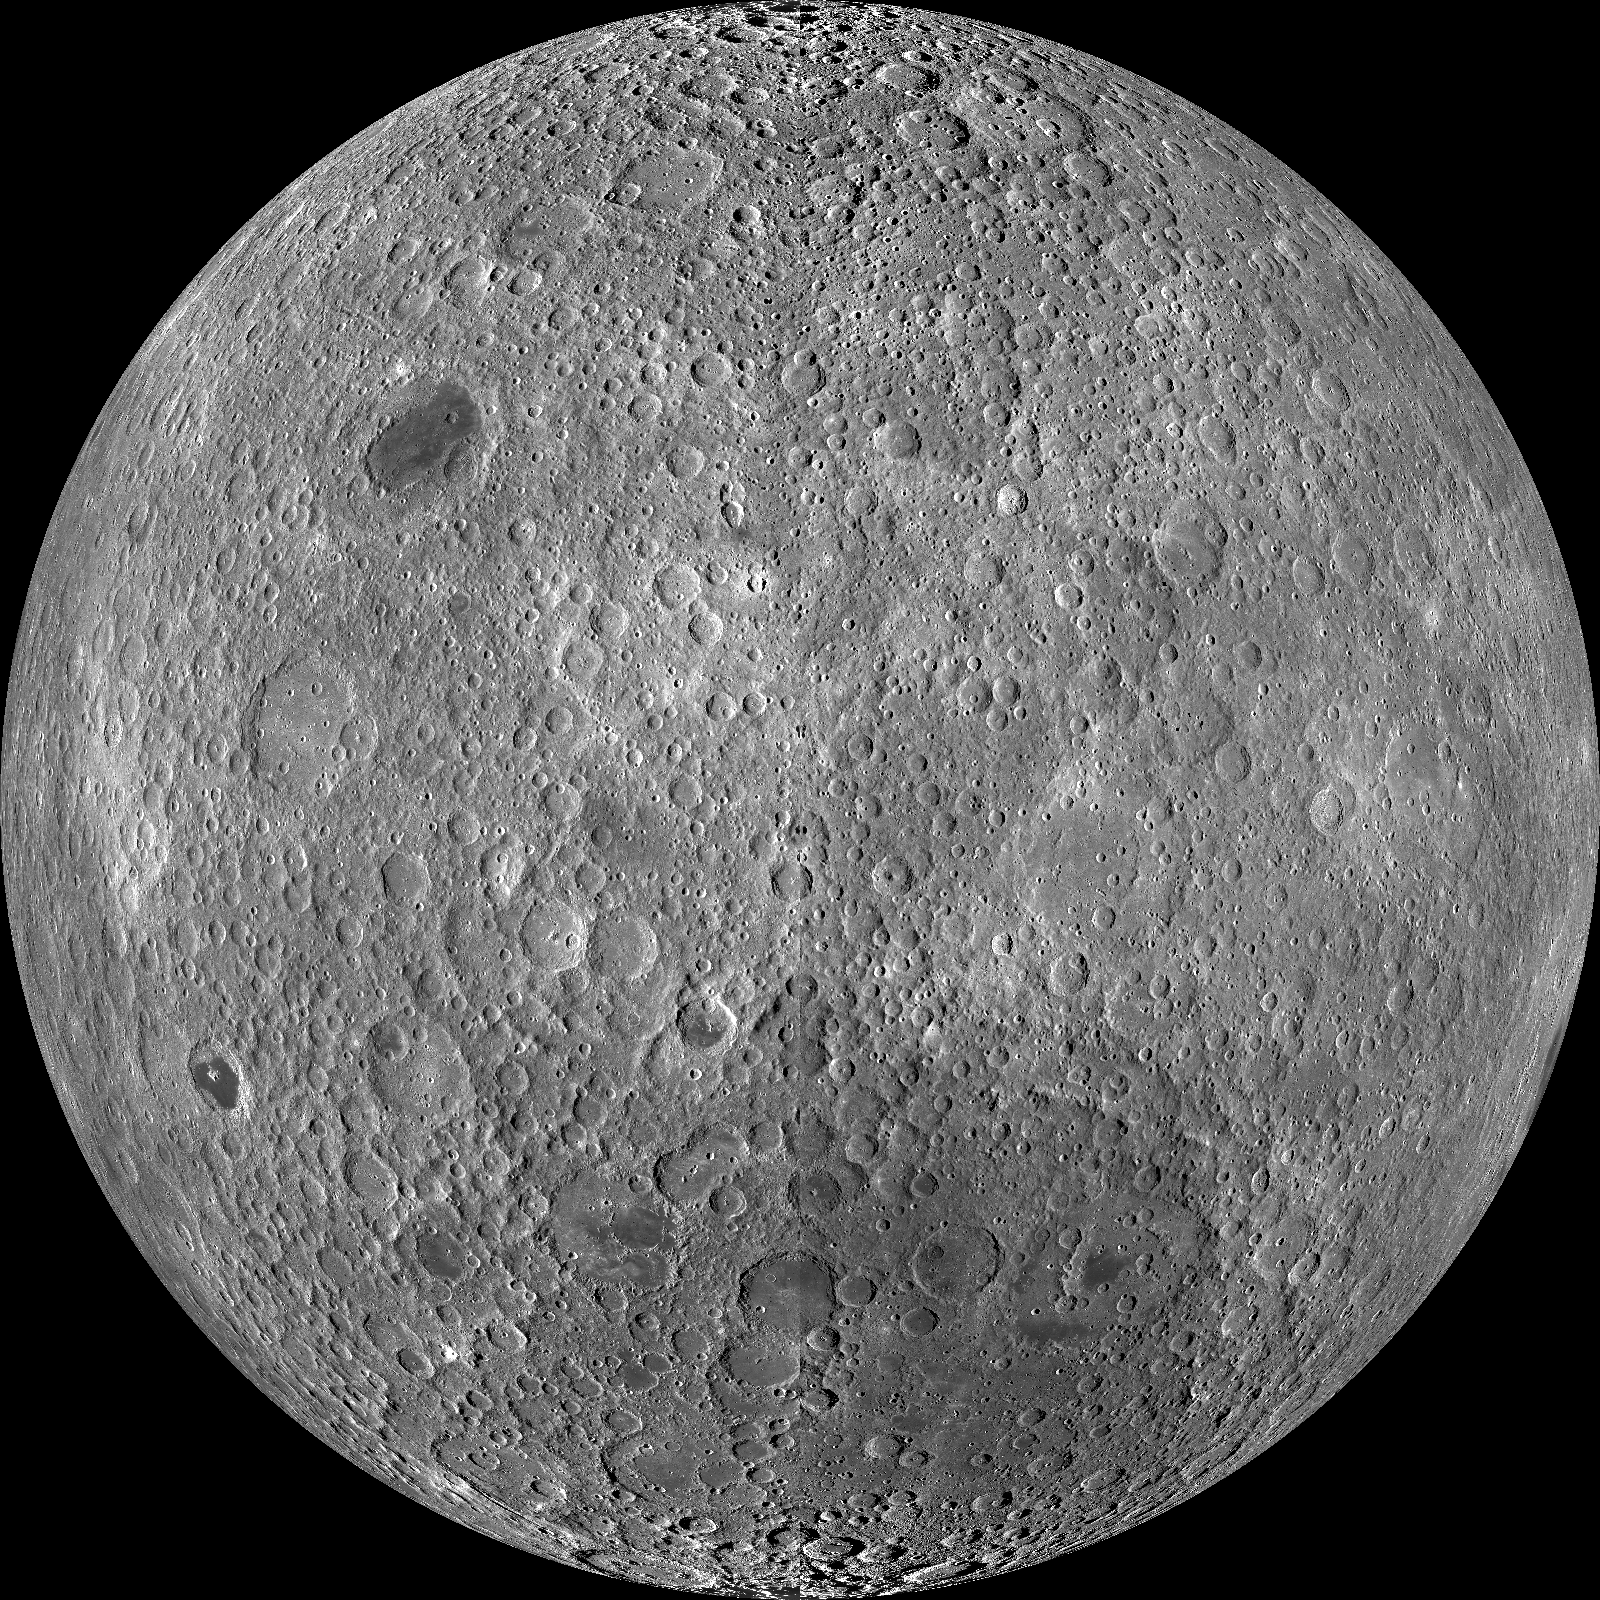 Detailed view of the Moon's surface, with sharp-edged craters and regional variations in shades of grey.